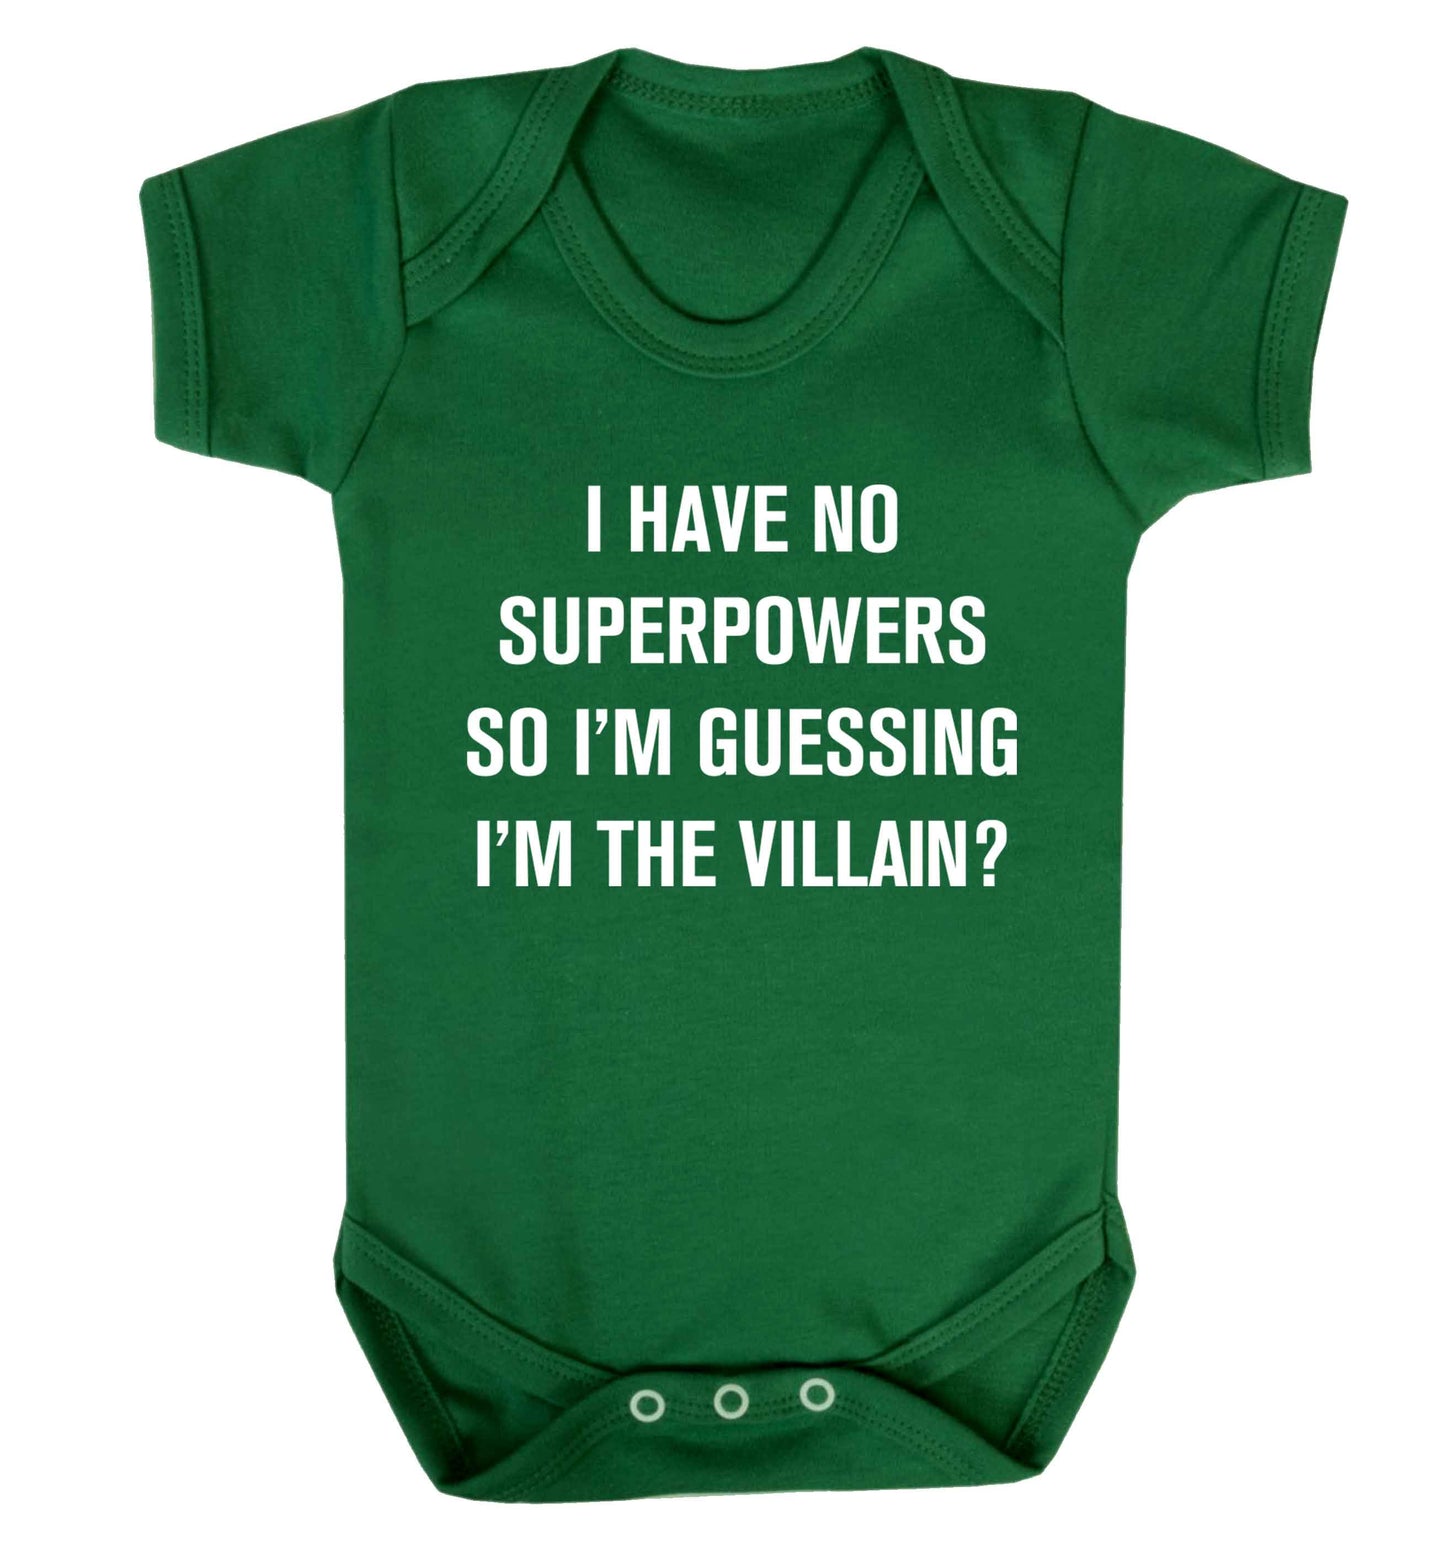 I have no superpowers so I'm guessing I'm the villain? Baby Vest green 18-24 months